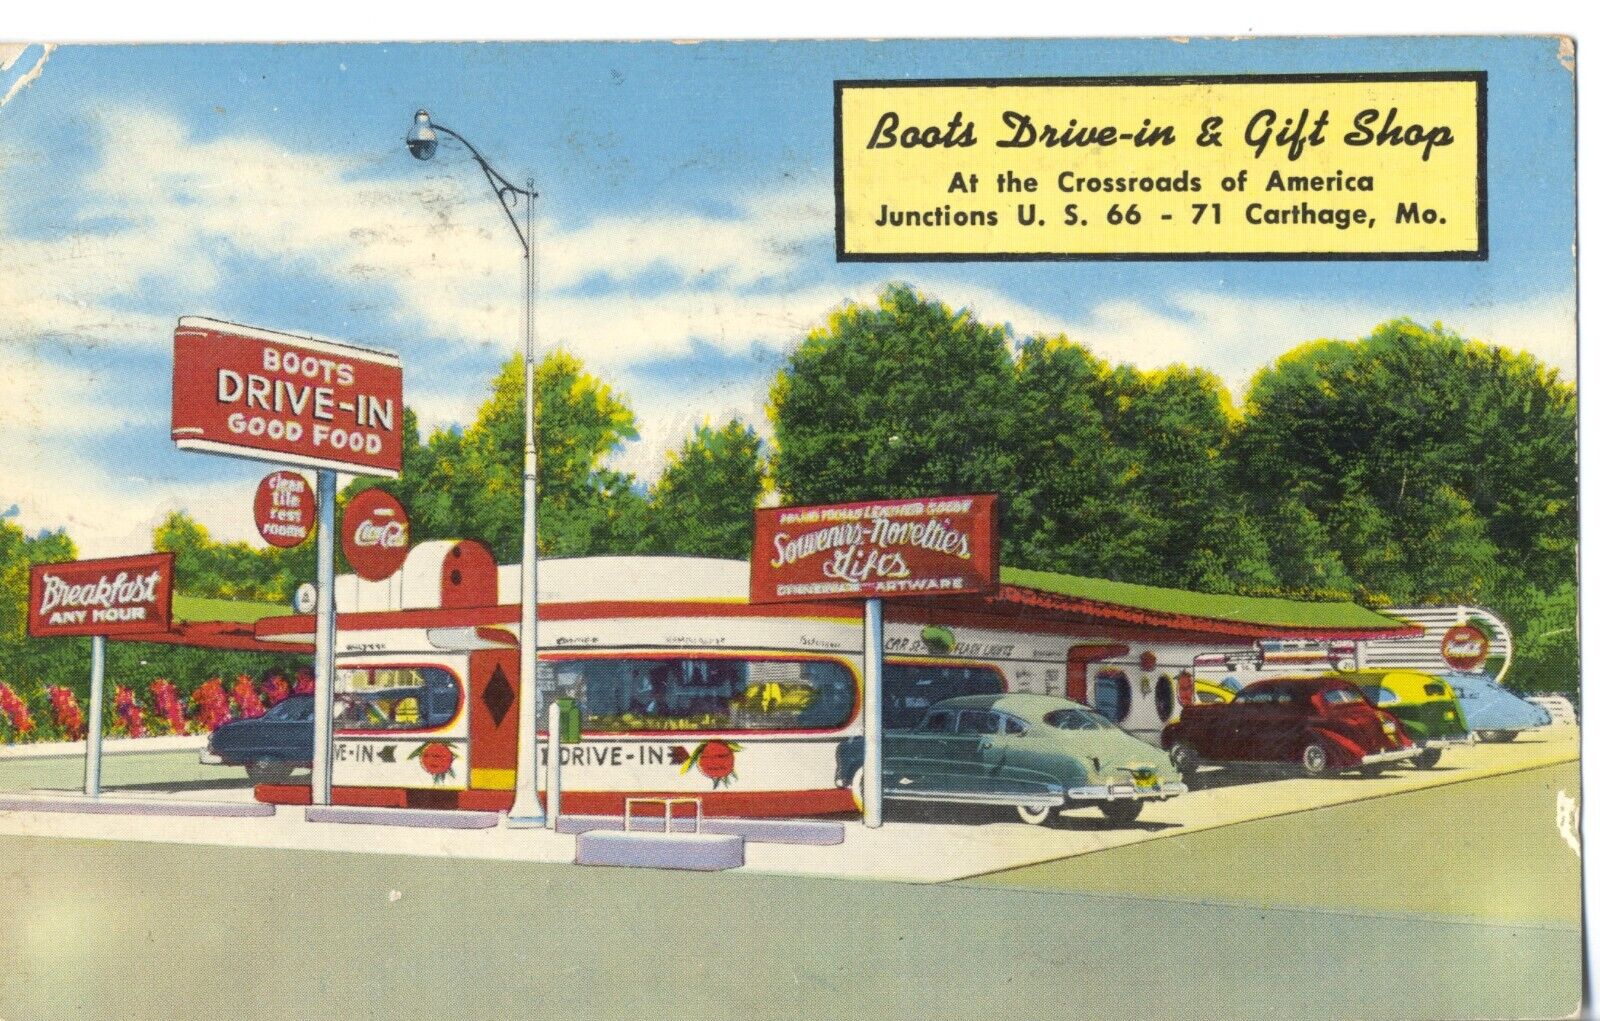 Boots Drive-In & Gift Shop on Route 66, Carthage, Mo. Missouri Postcard